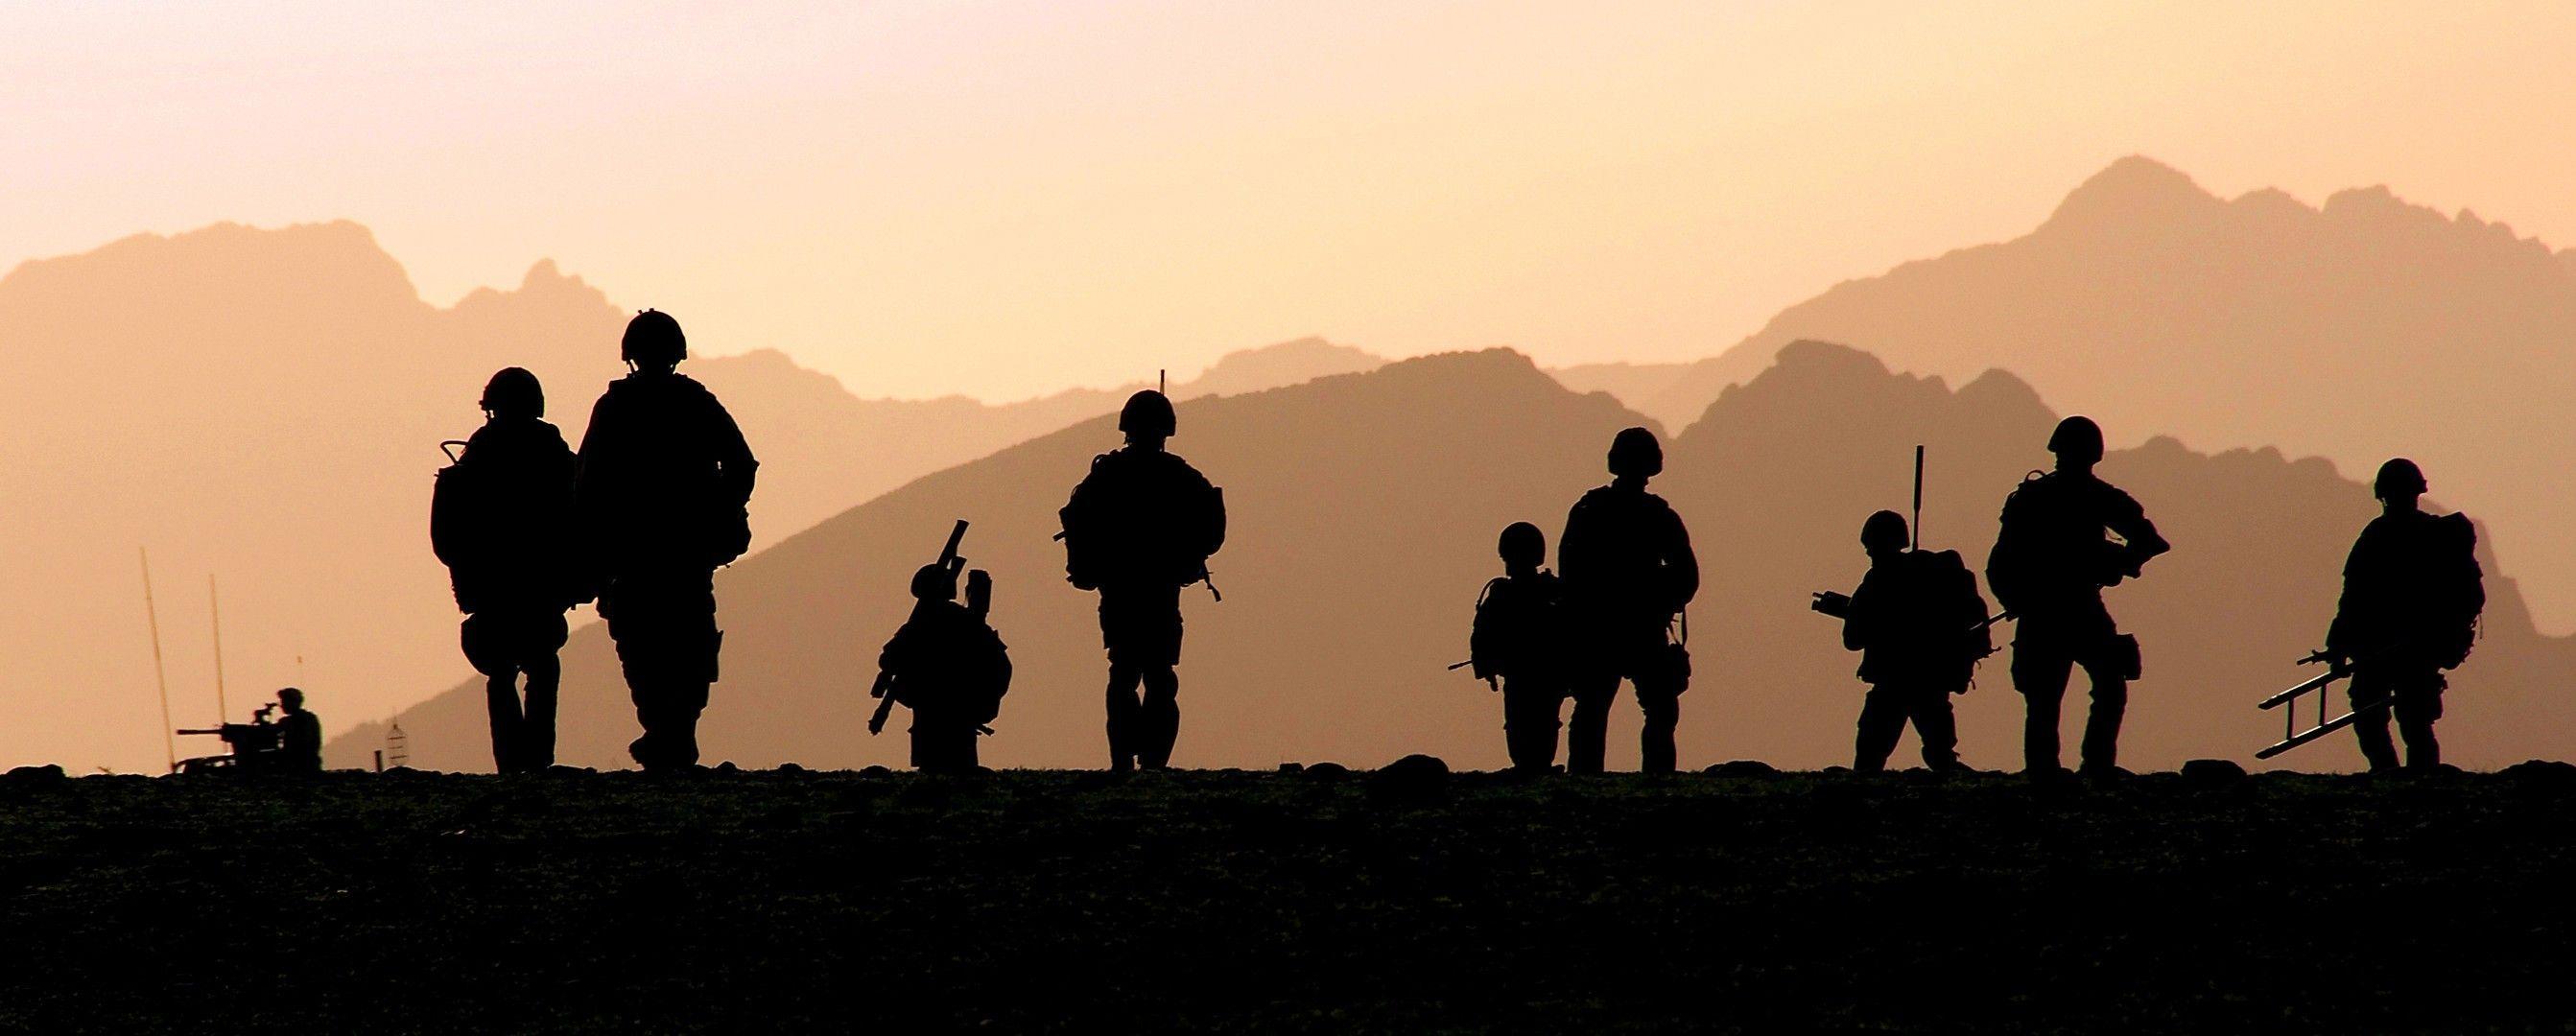 military, Silhouette, Royal Marines Wallpaper HD / Desktop and Mobile Background. Soldier silhouette, Royal marines, Military image